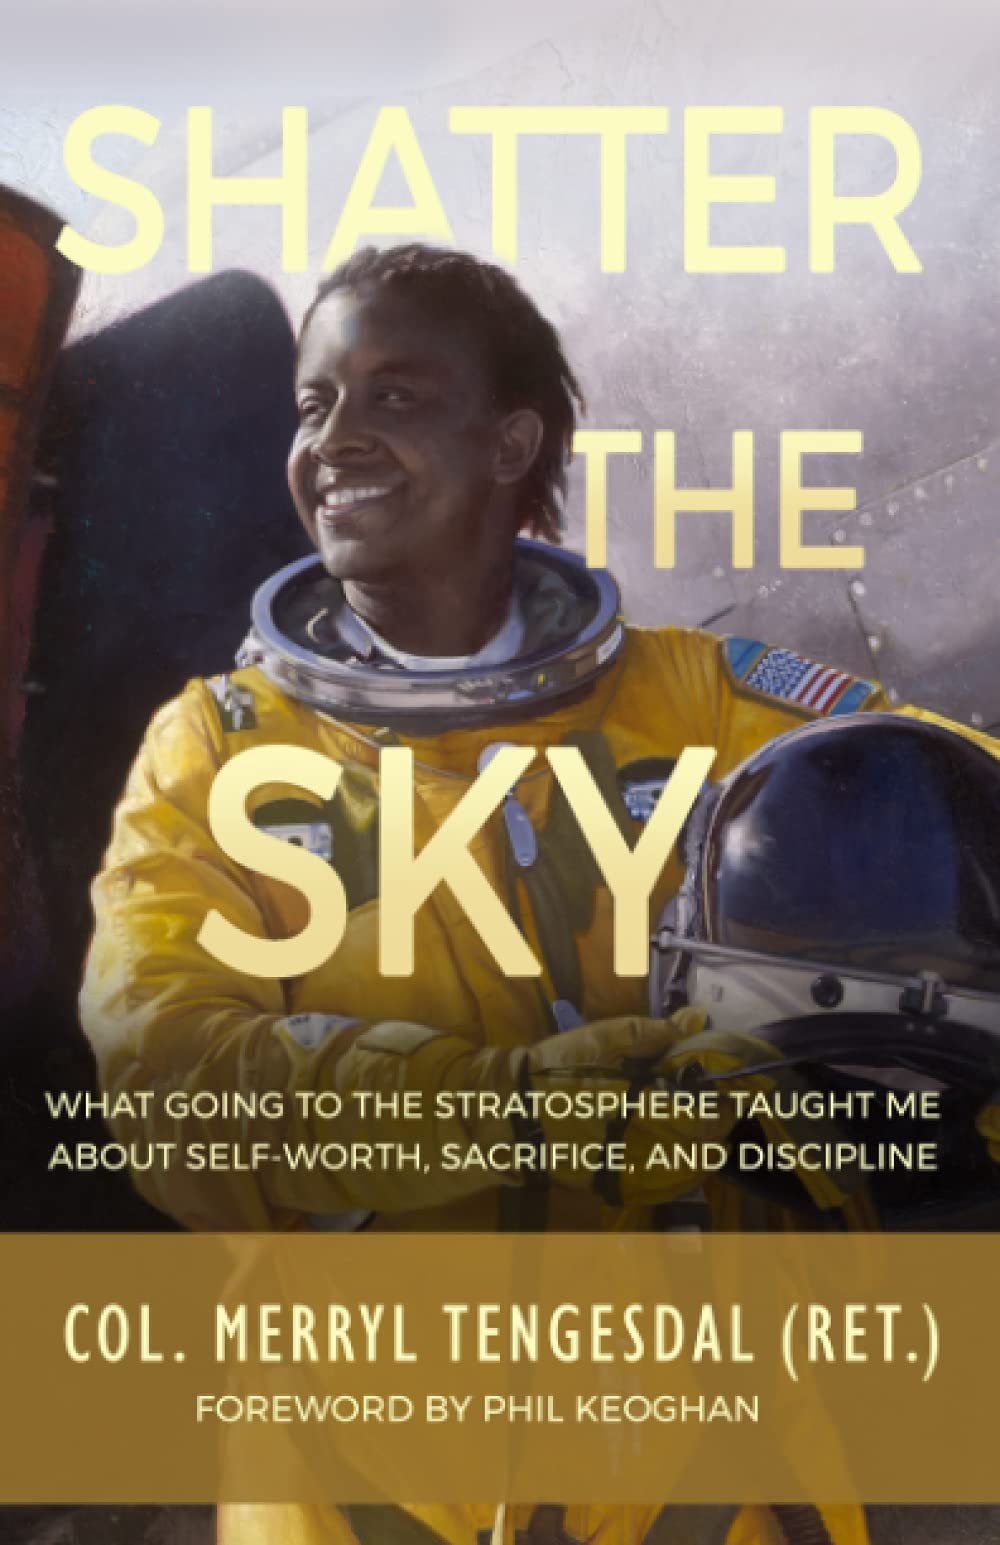 Shatter the Sky: What going to the stratosphere taught me about self-worth, sacrifice, and discipline